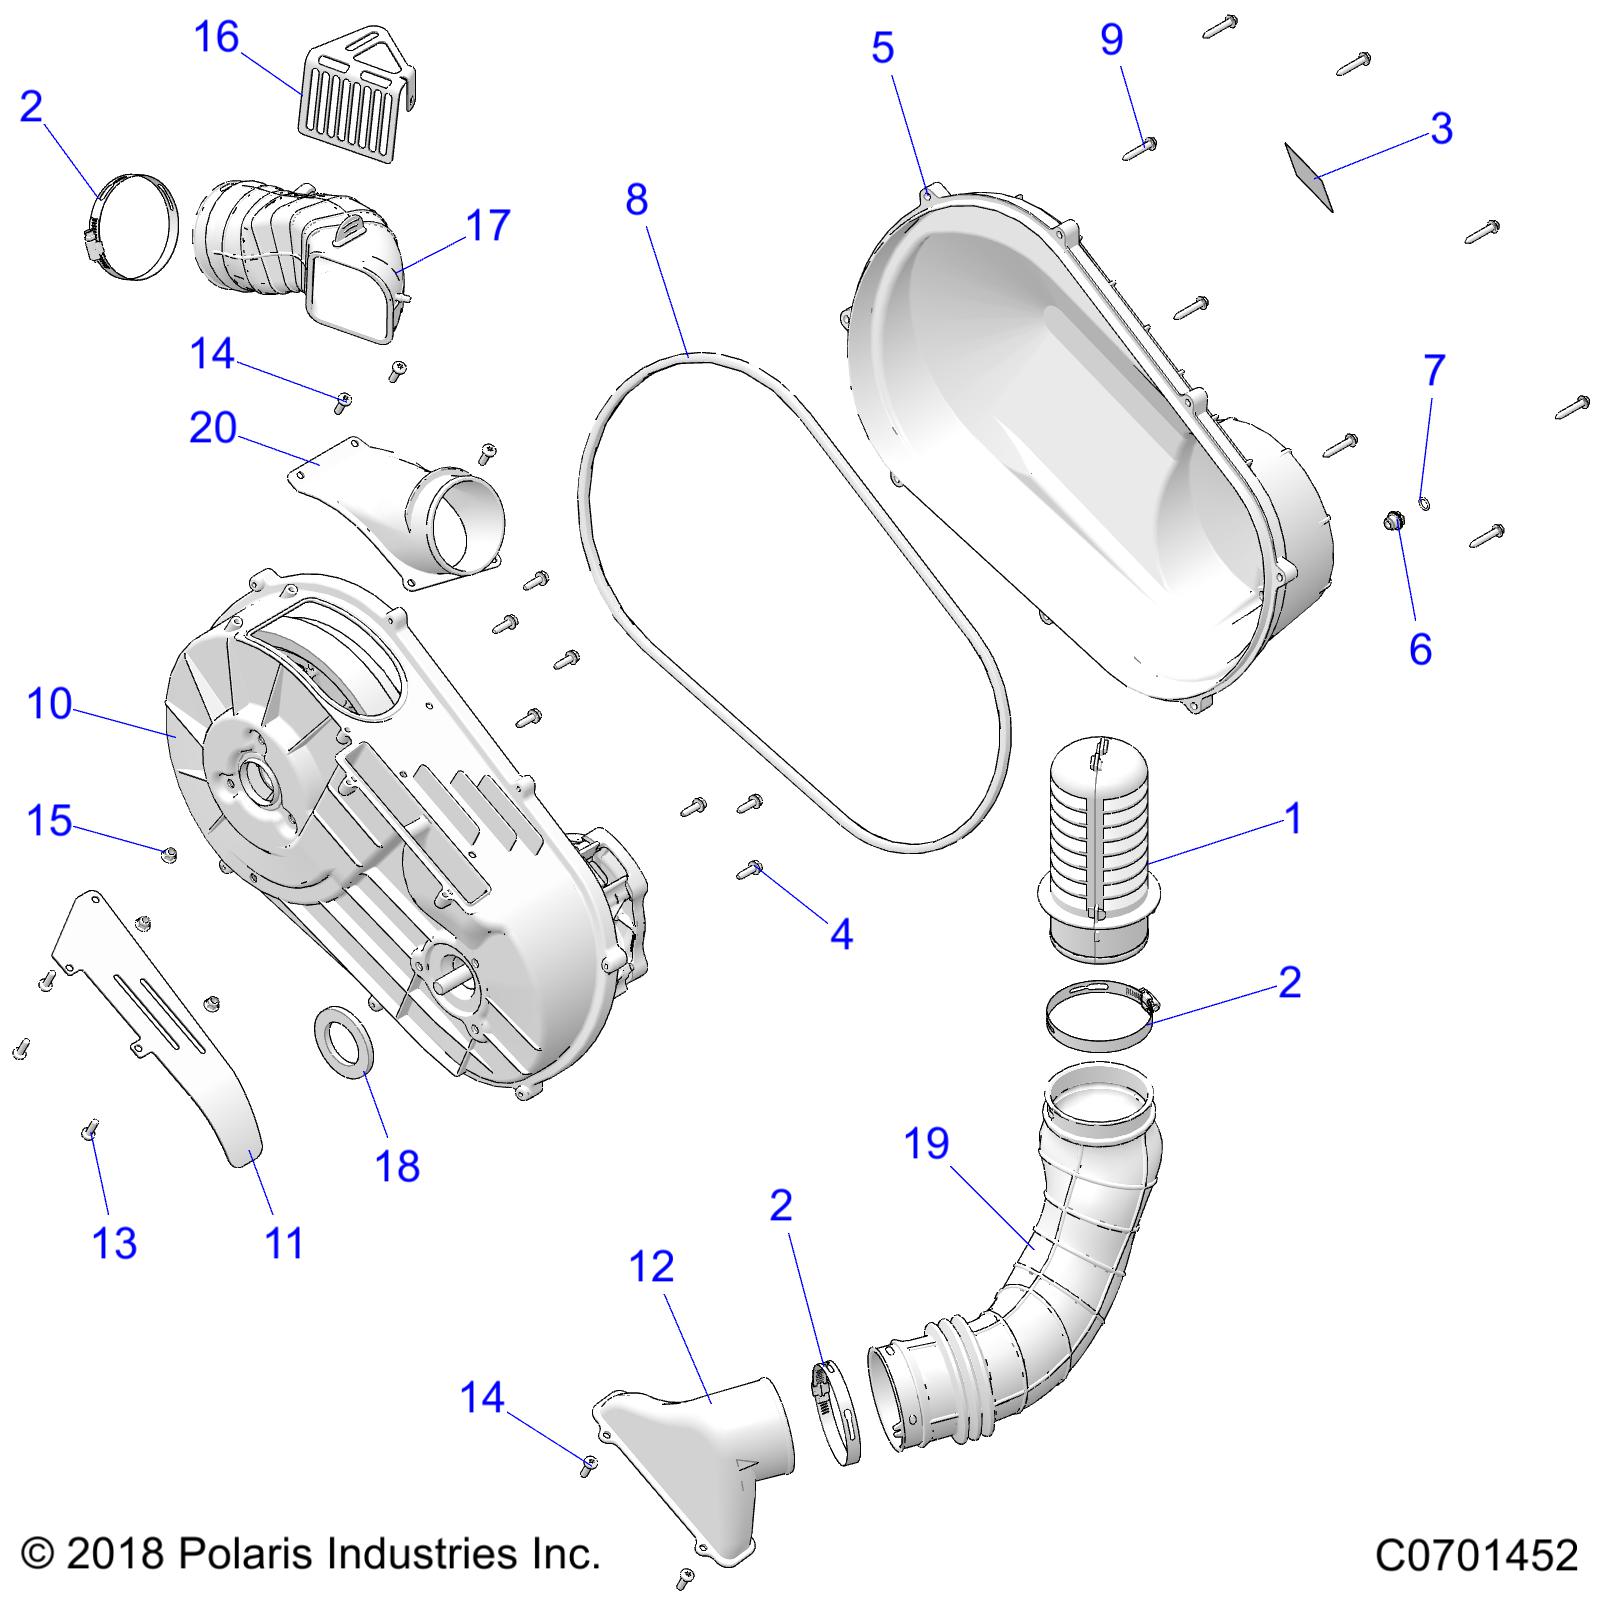 Part Number : 2635411 CLUTCH AIR INLET DUCT ASSEMBLY